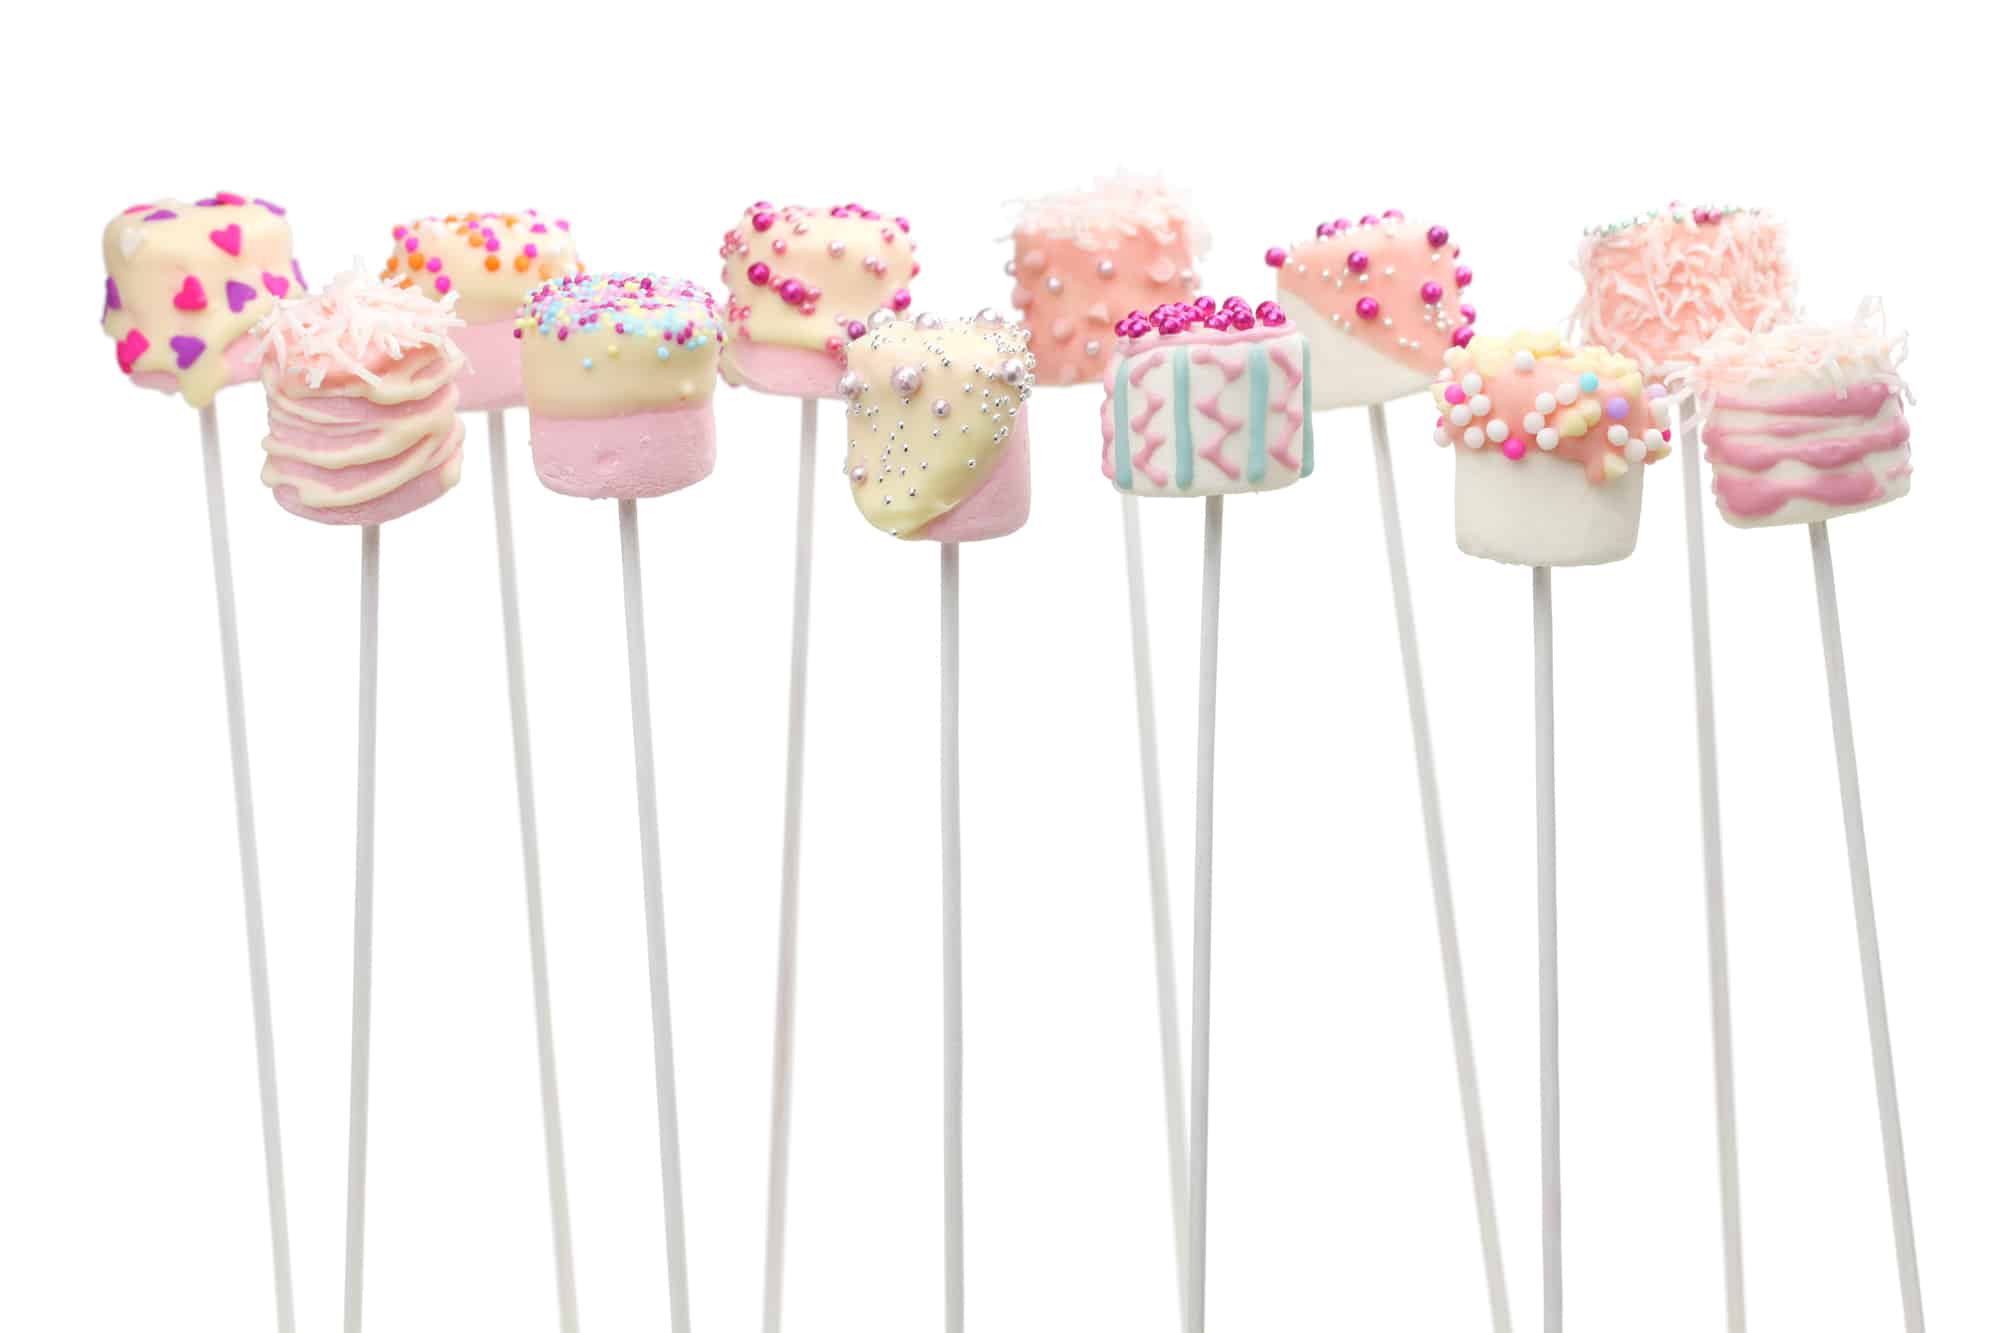 Frosted and decorated marshmallows on a stick for Valentine's